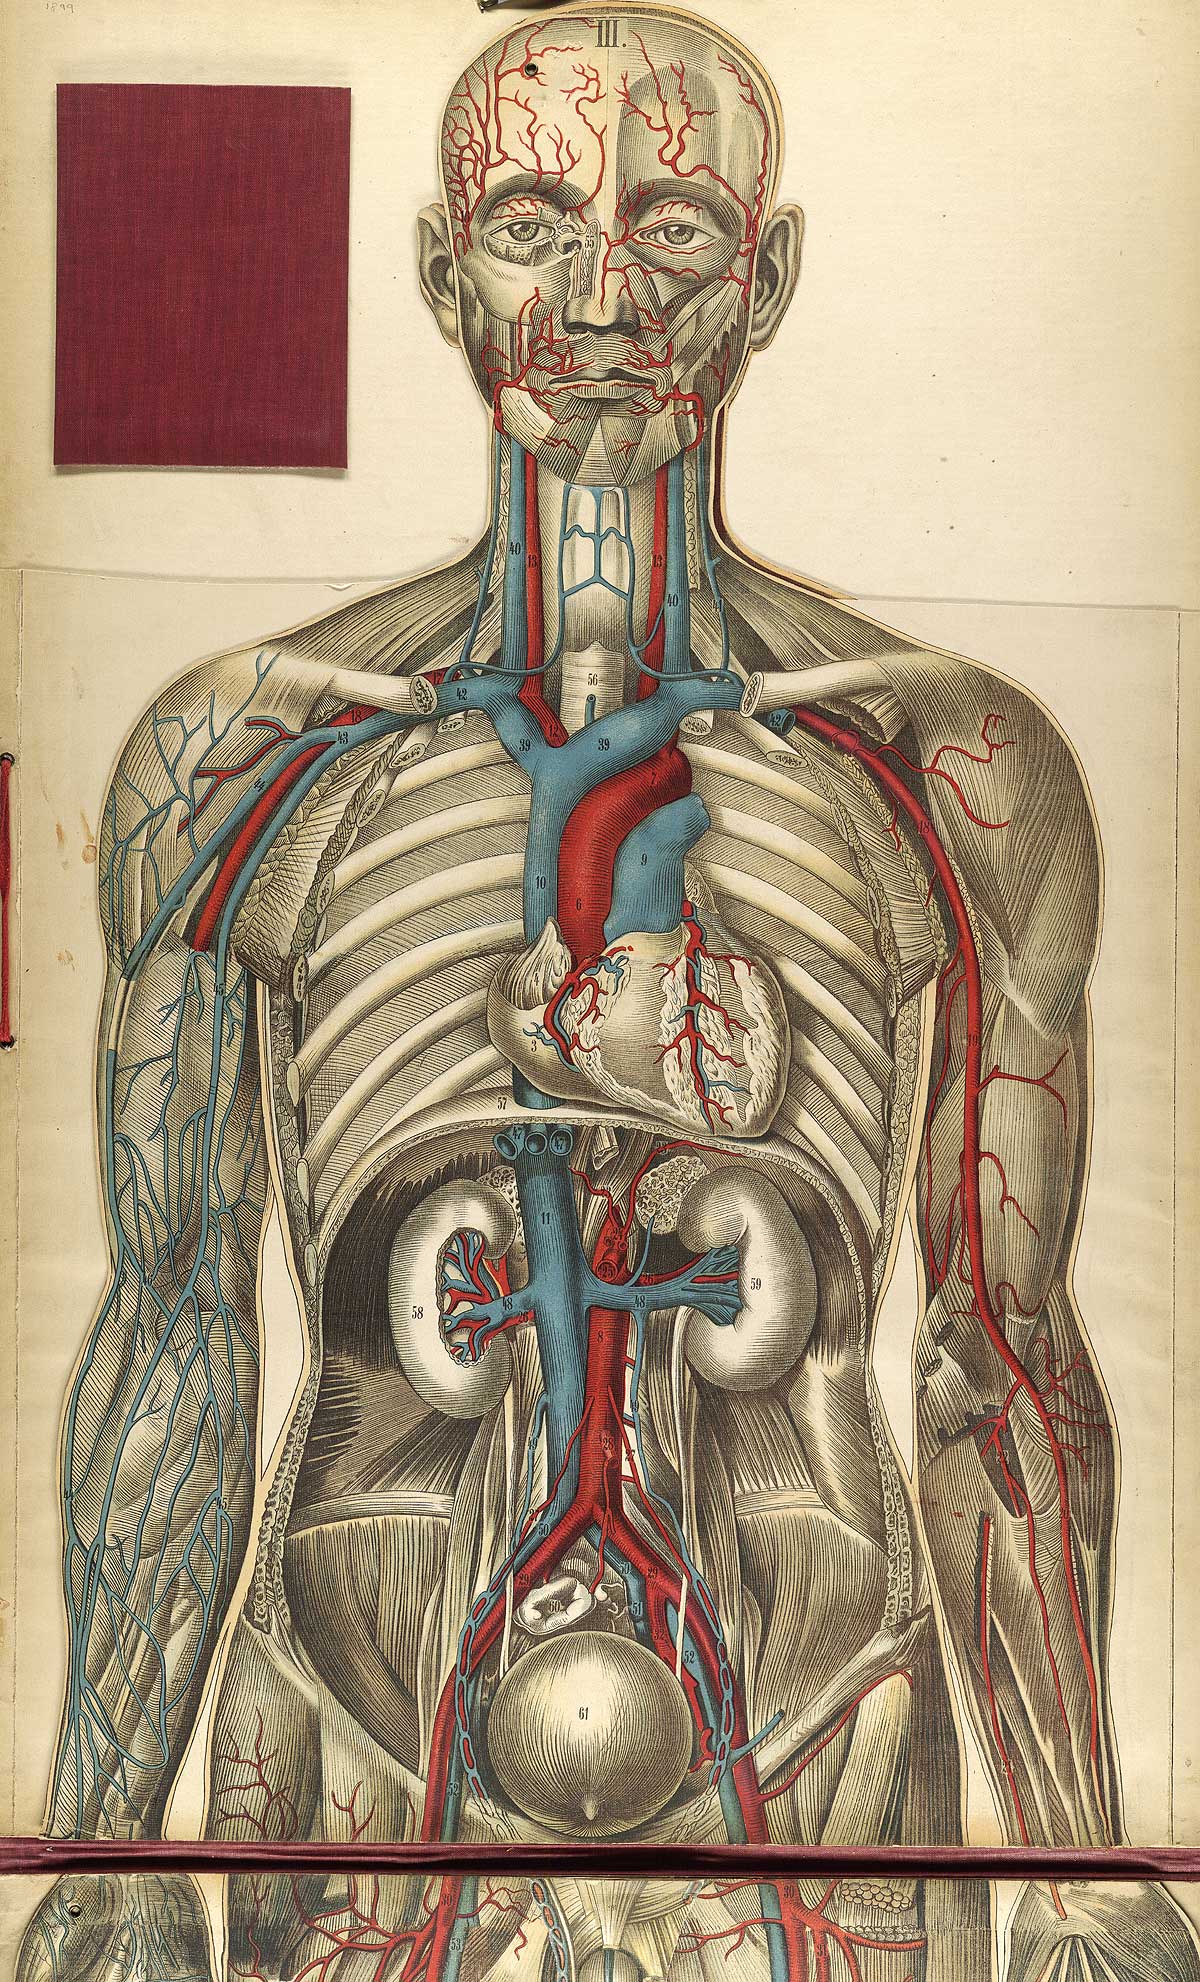 Chromolithograph showing the arterial and venous of the upper half of the front of the human body, from Julien Bouglé’s Le corps humain en grandeur naturelle, NLM Call no. WE B758c 1899.